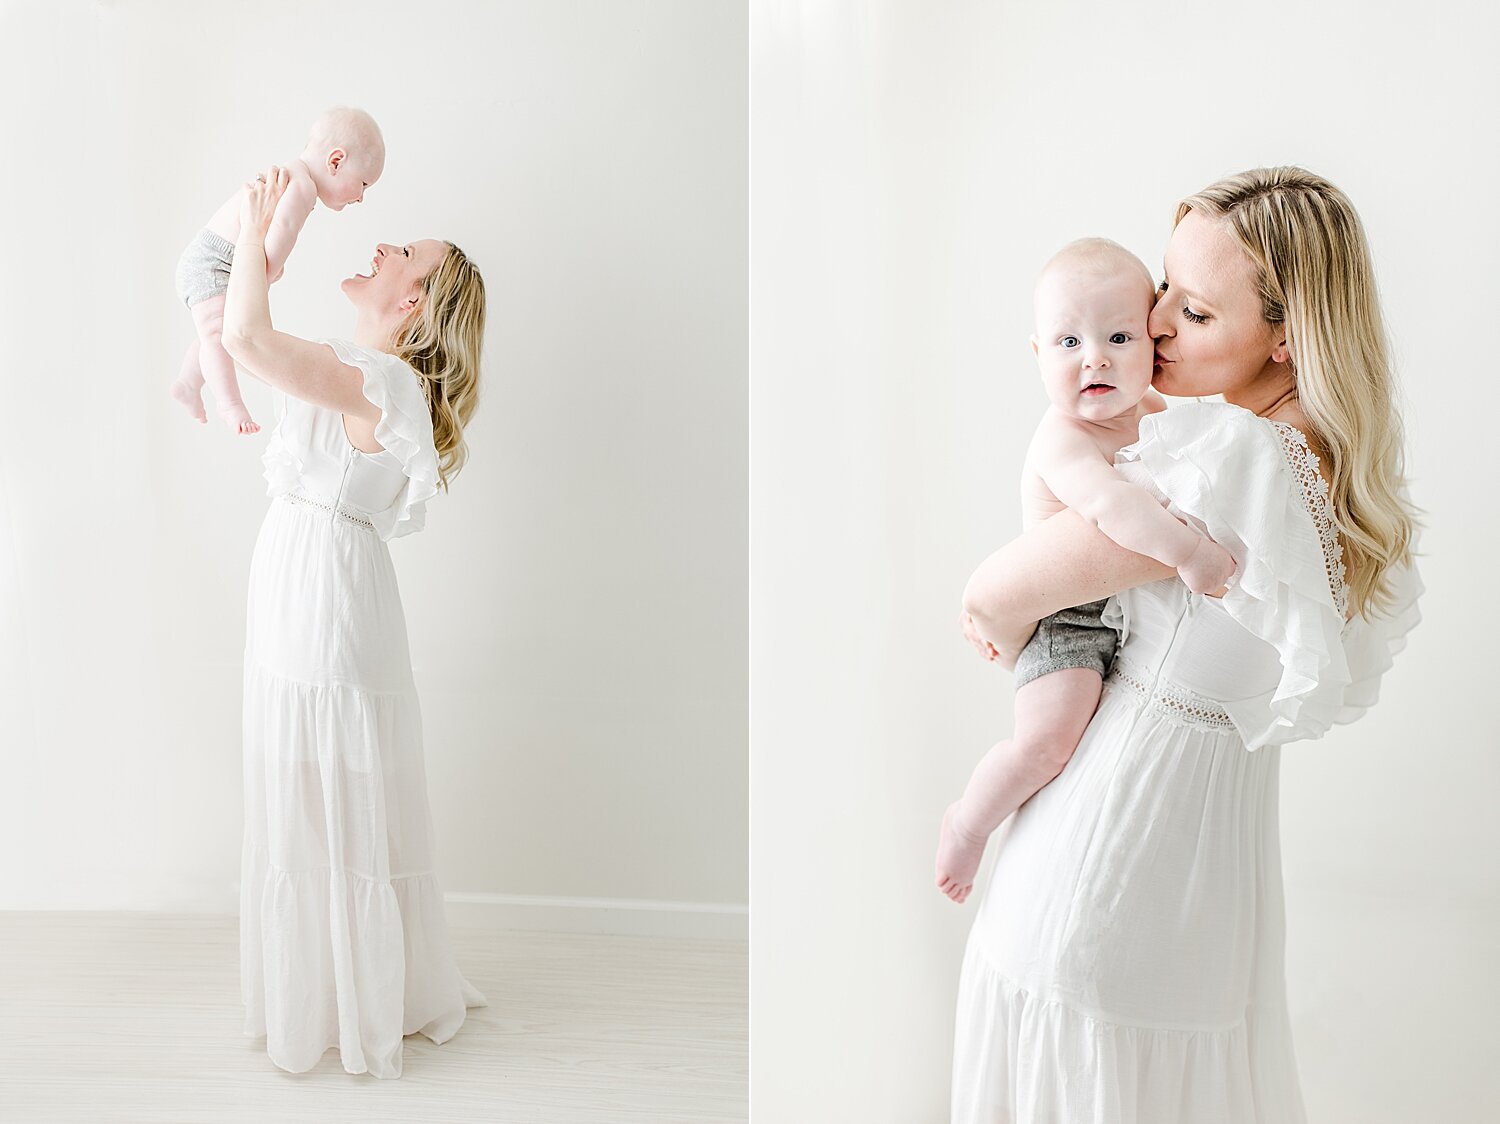 Mommy and me photoshoot in studio in Westport, CT. Photo by Kristin Wood Photography.